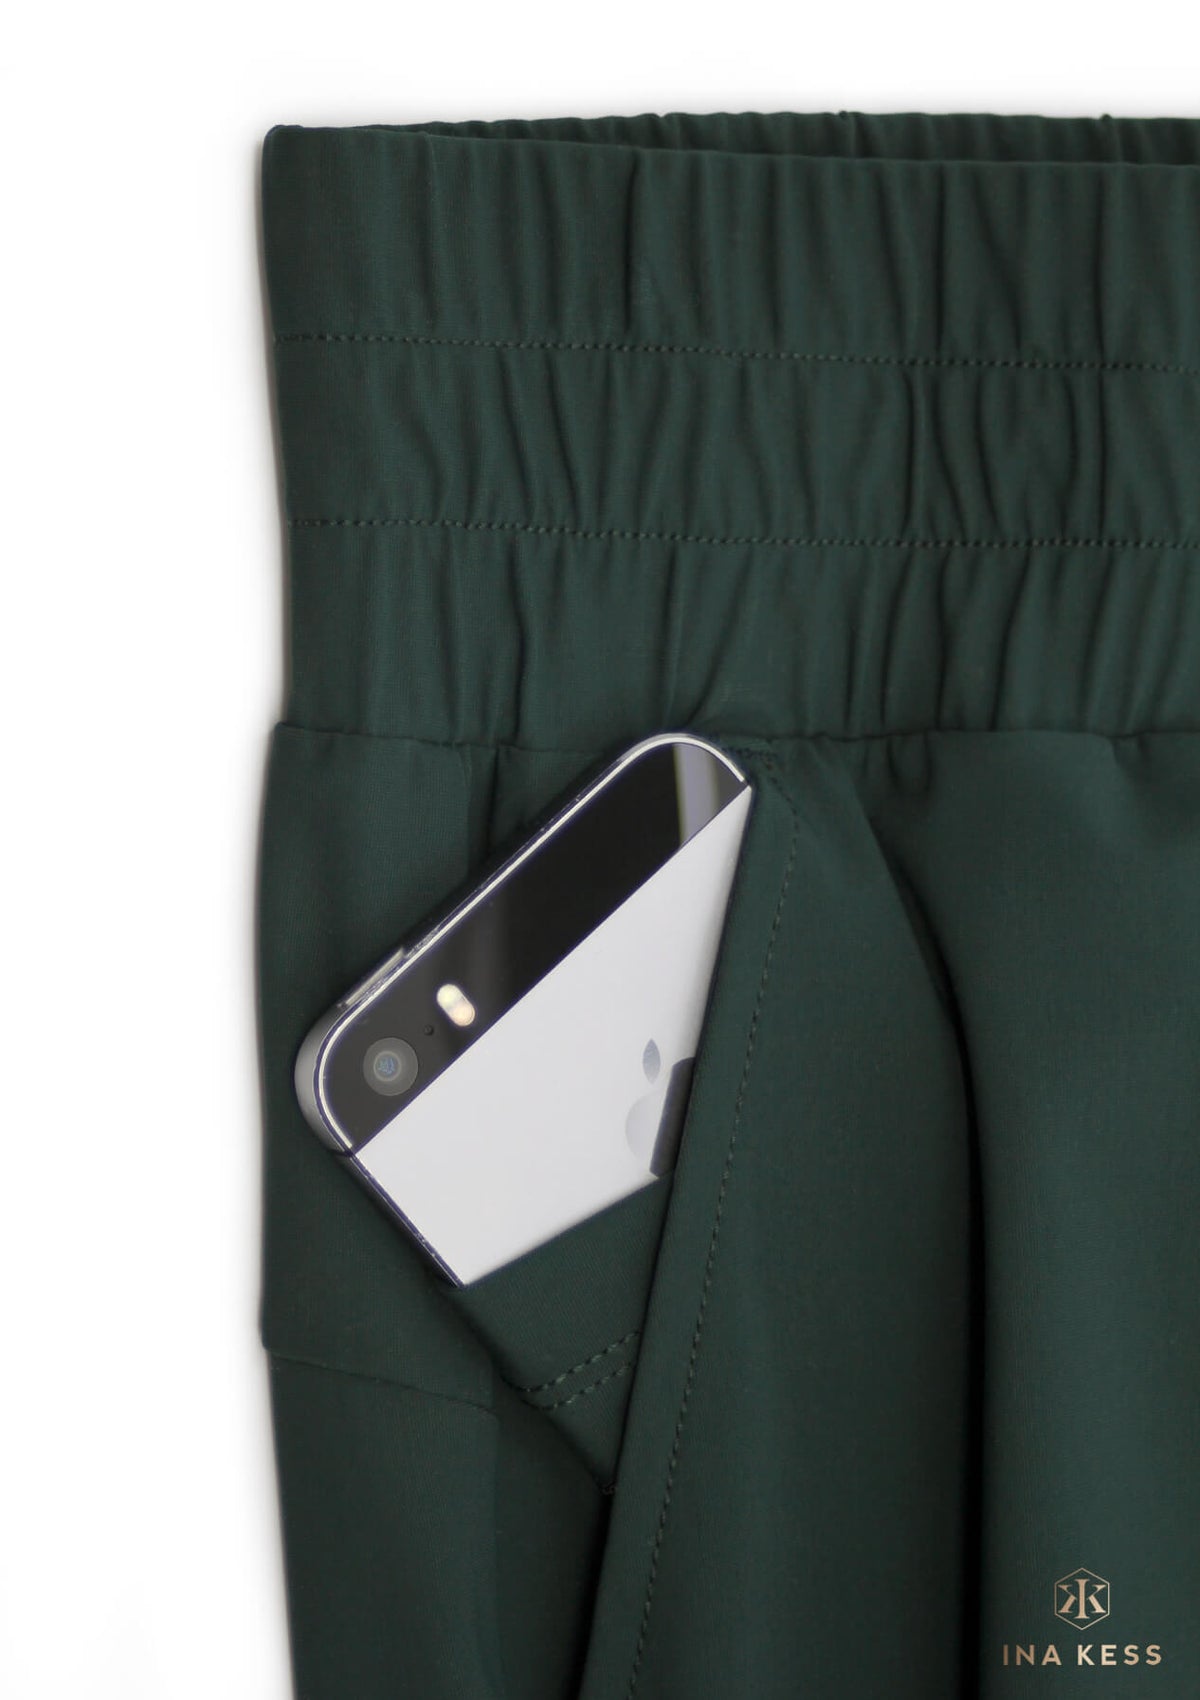 LUXE LÉGER Track Pants emerald